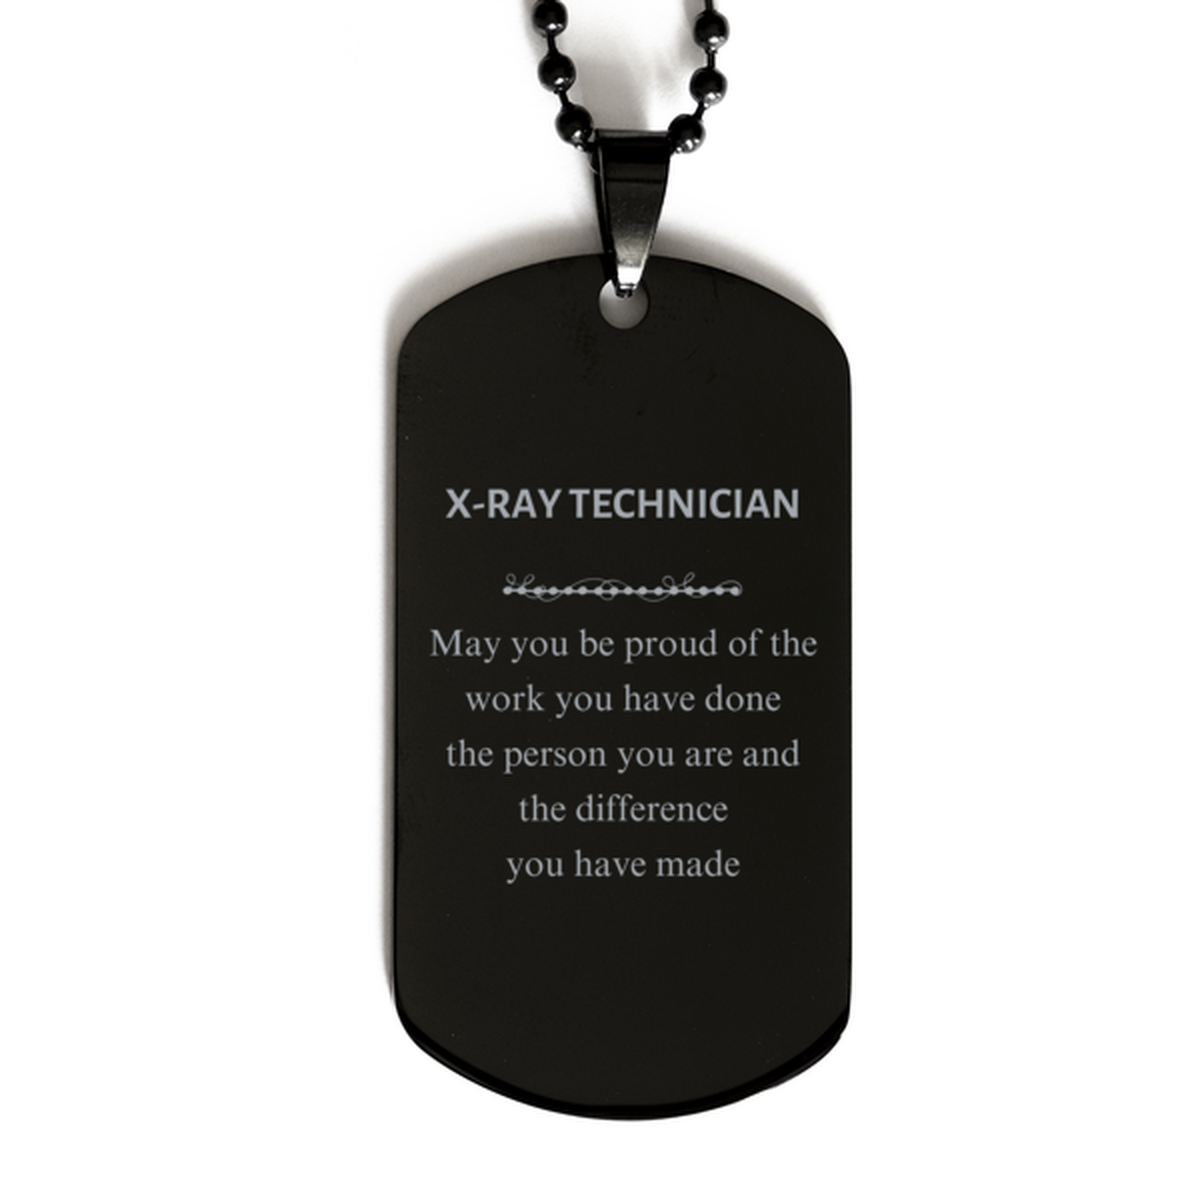 X-Ray Technician May you be proud of the work you have done, Retirement X-Ray Technician Black Dog Tag for Colleague Appreciation Gifts Amazing for X-Ray Technician